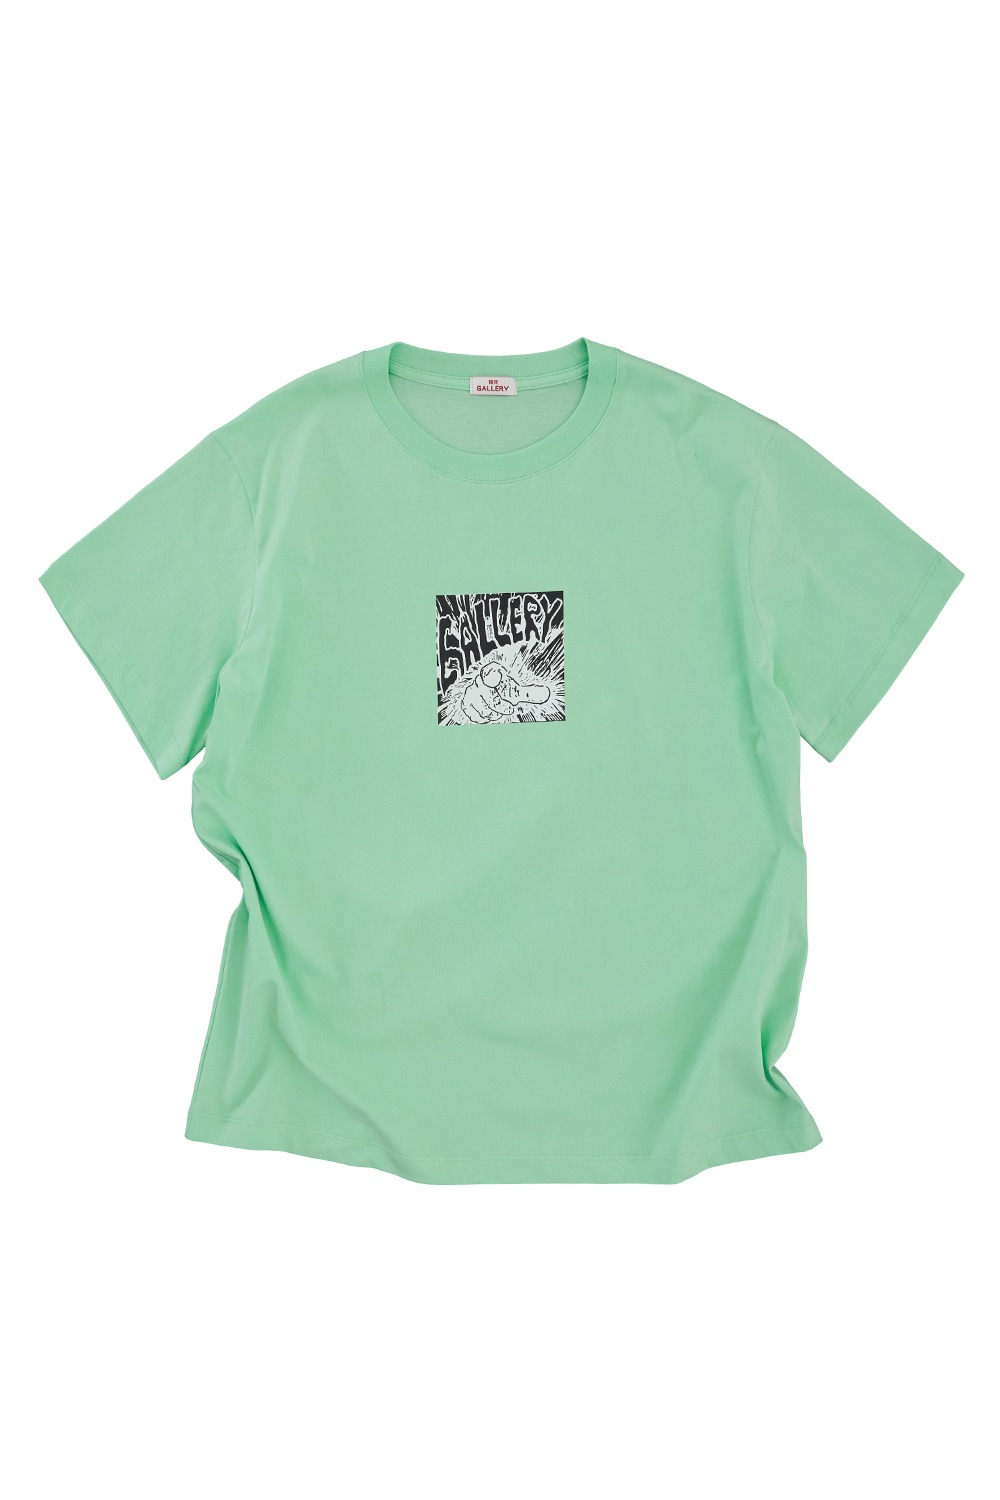 You Have To Choose 1011 Gallery T-Shirt-Mint